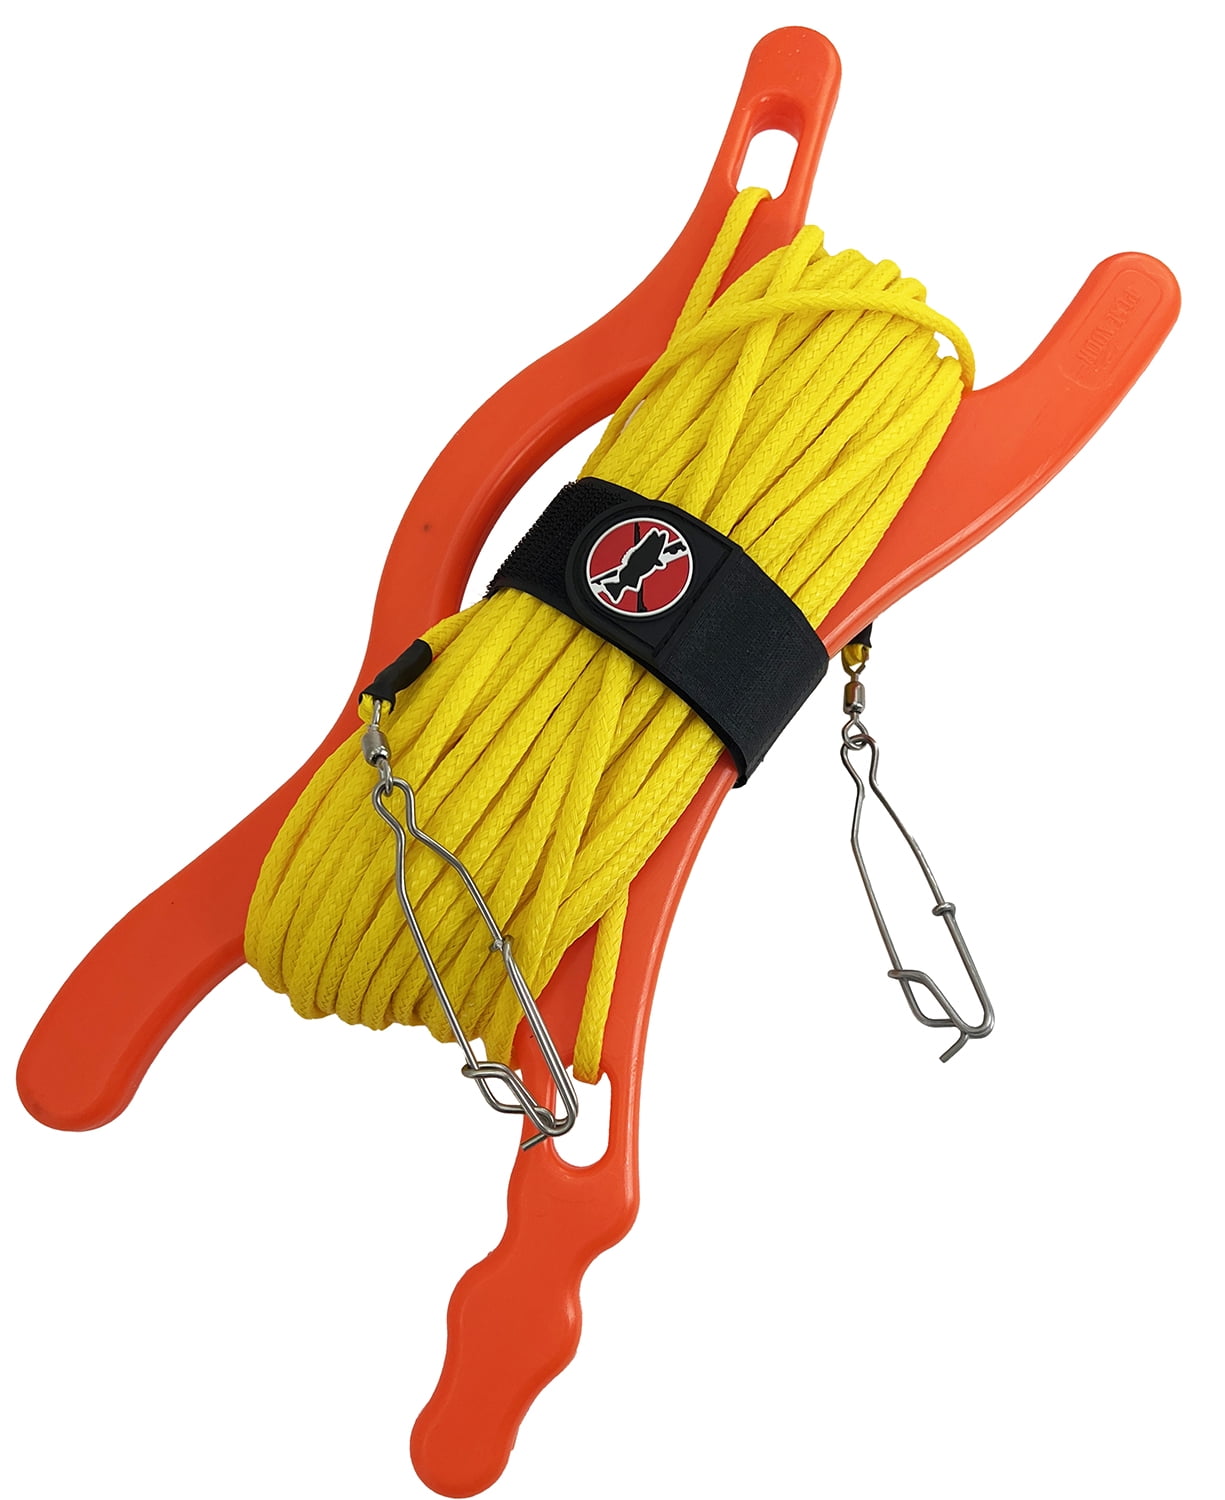 Float Line with Winder for Boating, Towing a Float or Buoy While  Spearfishing Snorkeling and Scuba